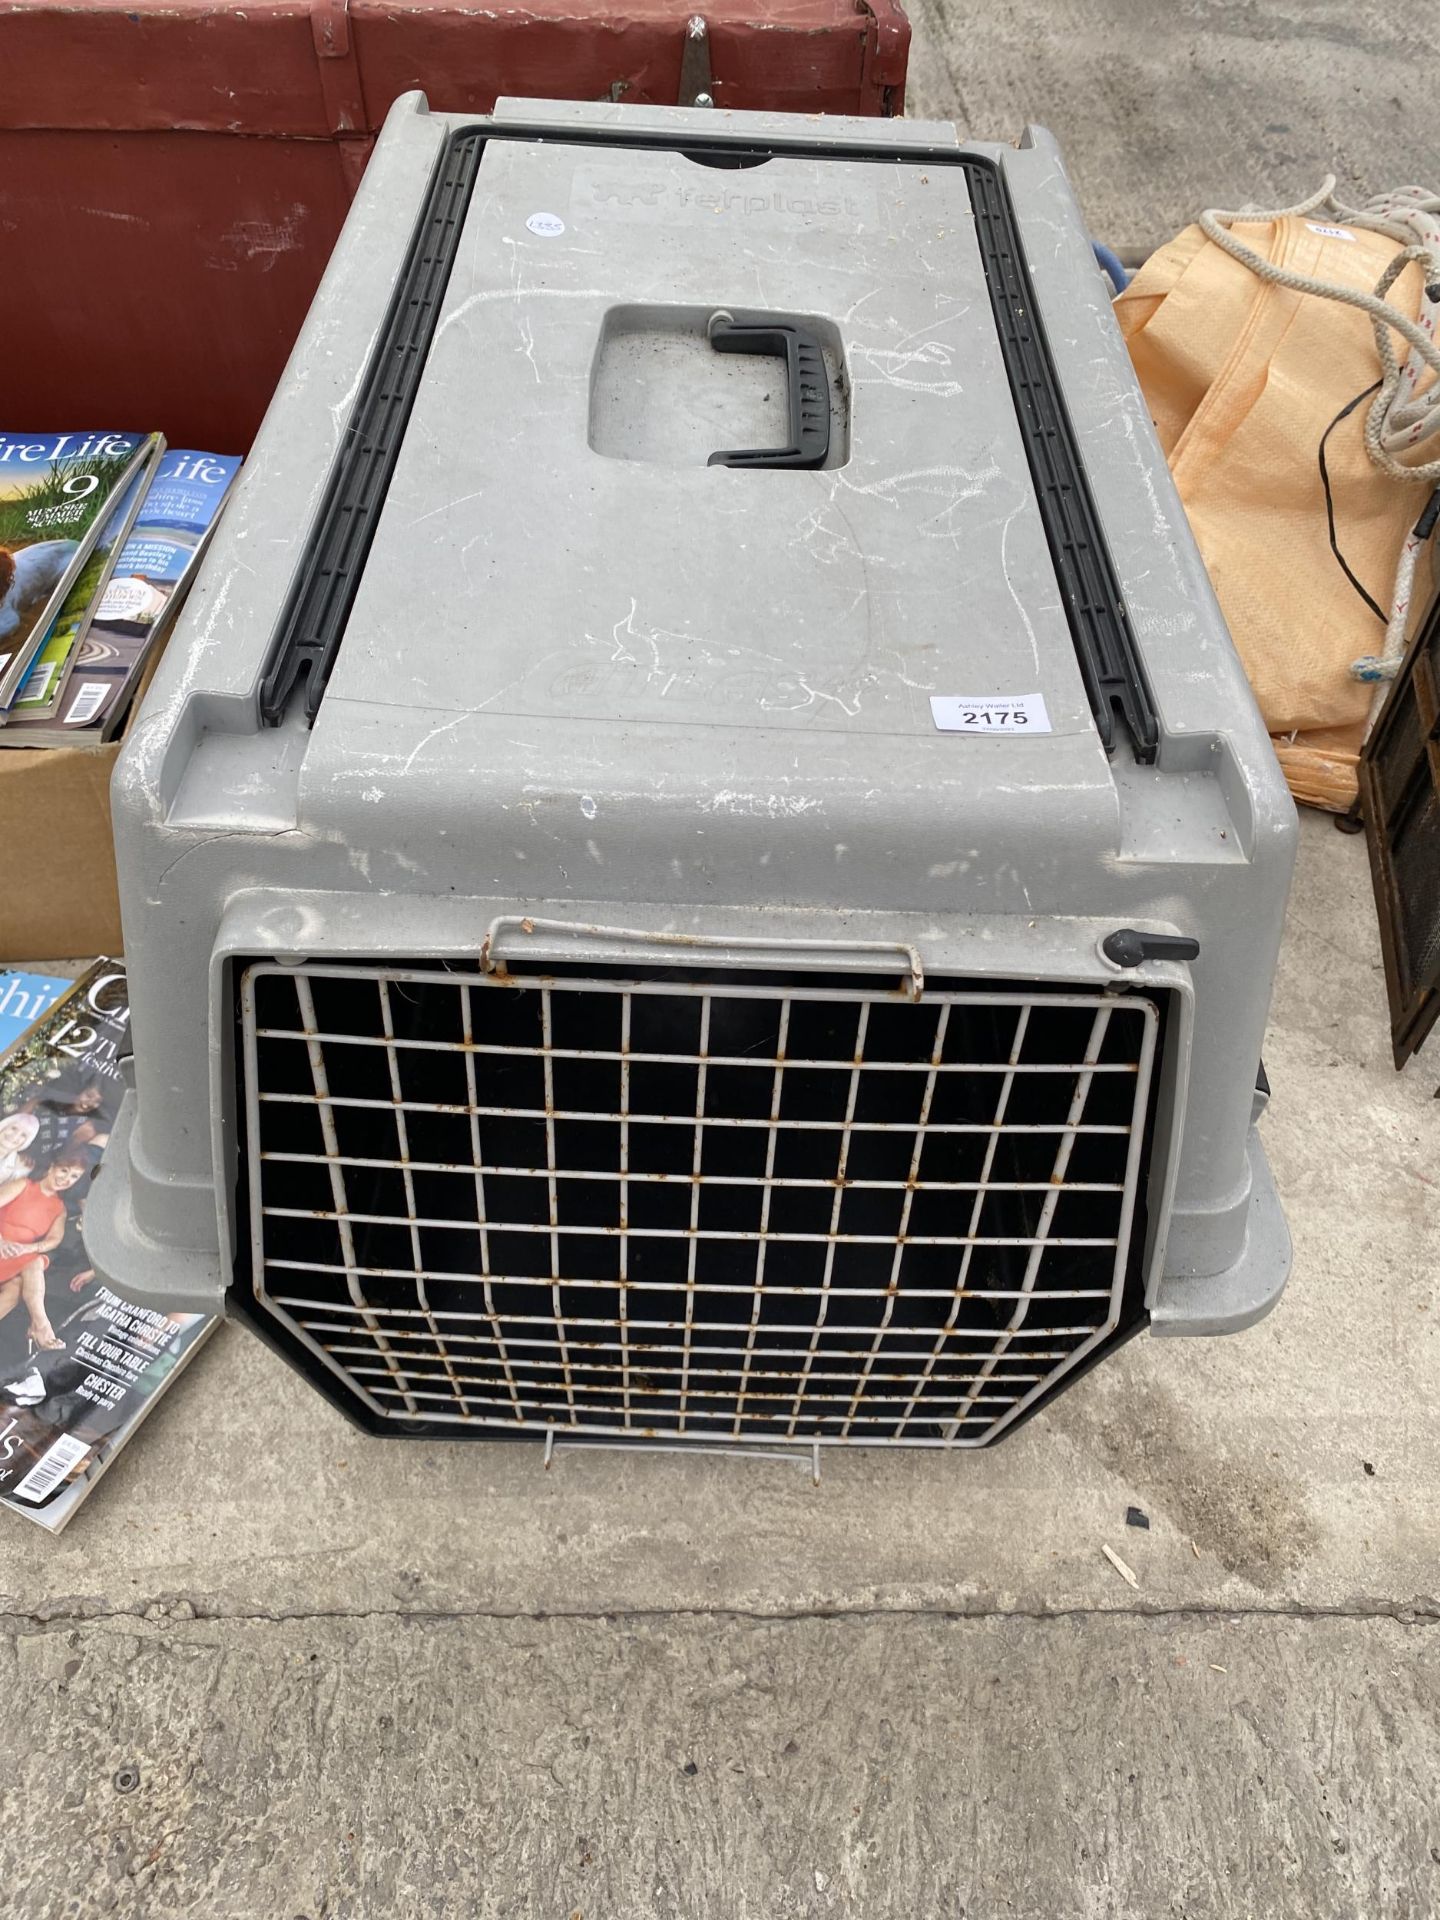 A PET CARRYING CRATE